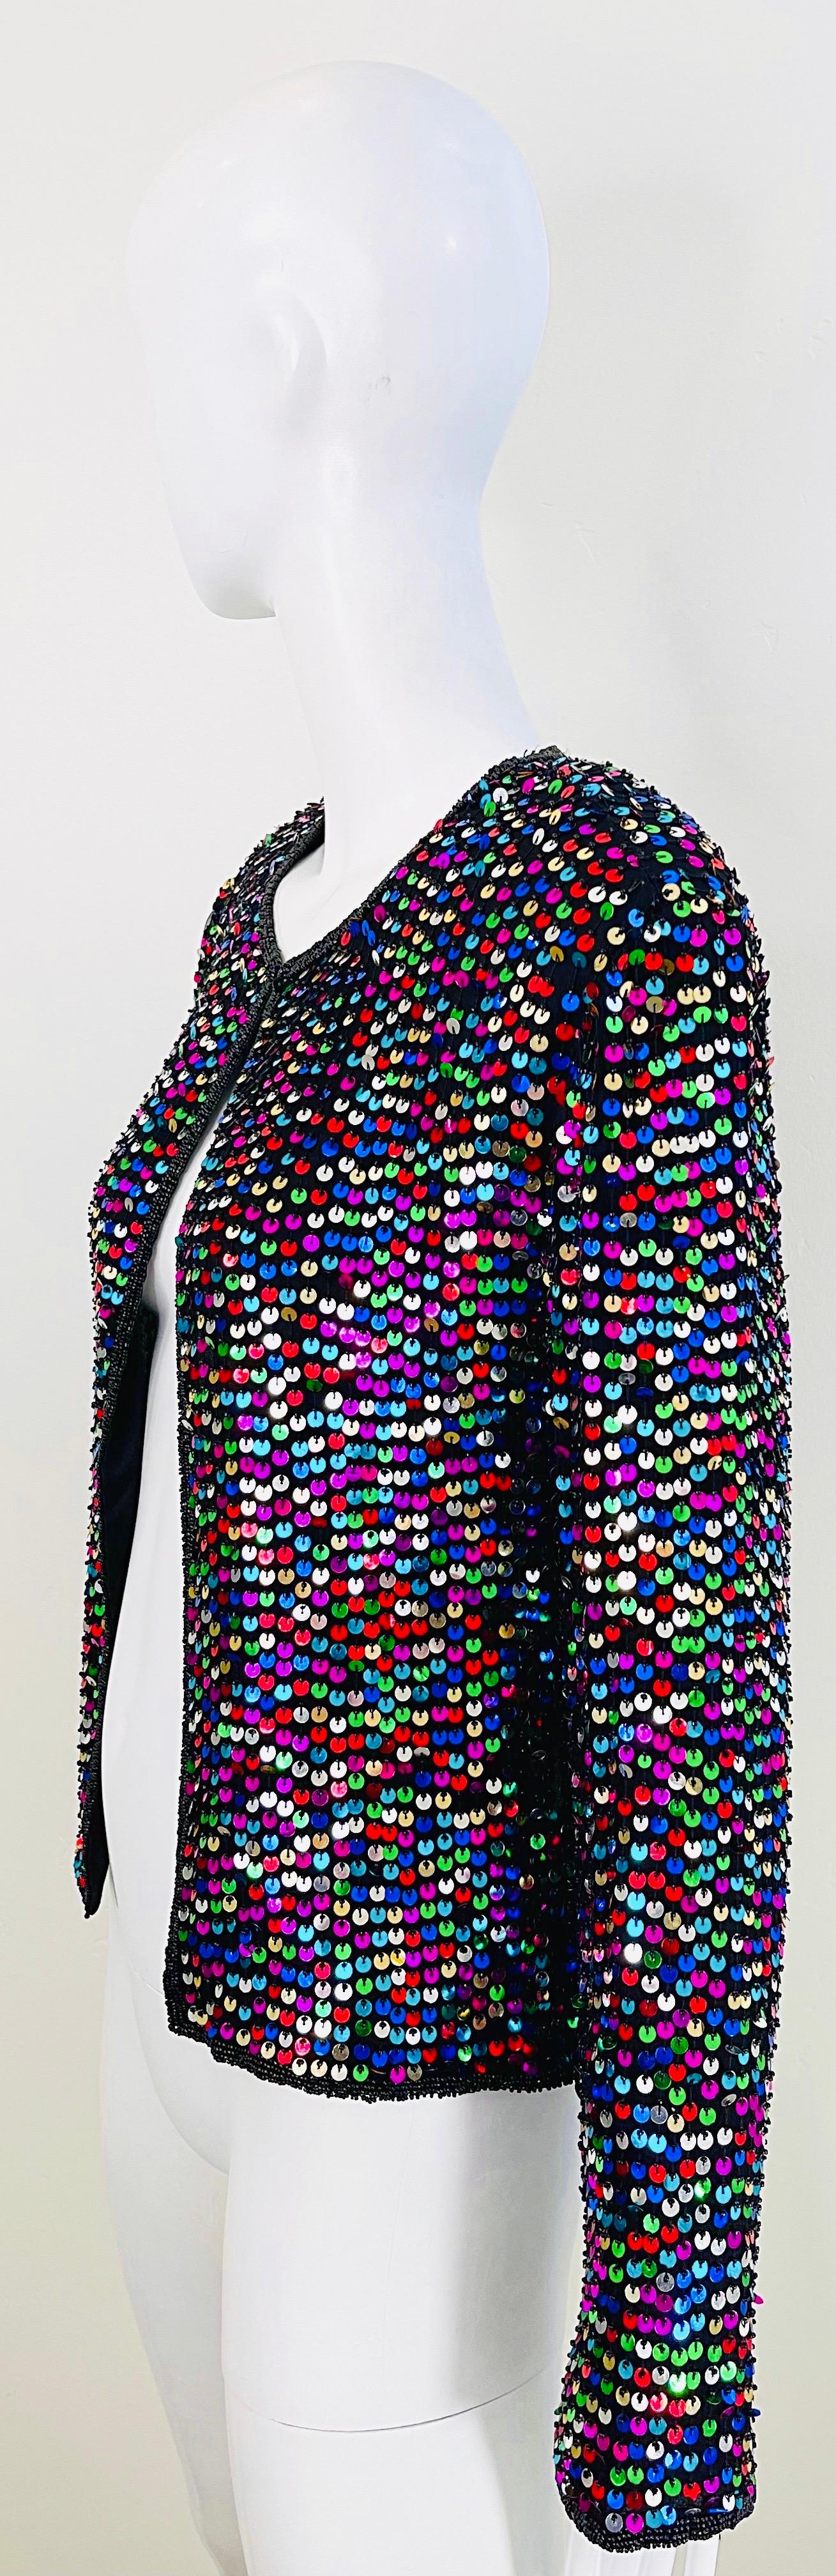 1990s Fully Sequined Beaded Size Large Colorful Silk 90s Vintage Cardigan Top For Sale 7